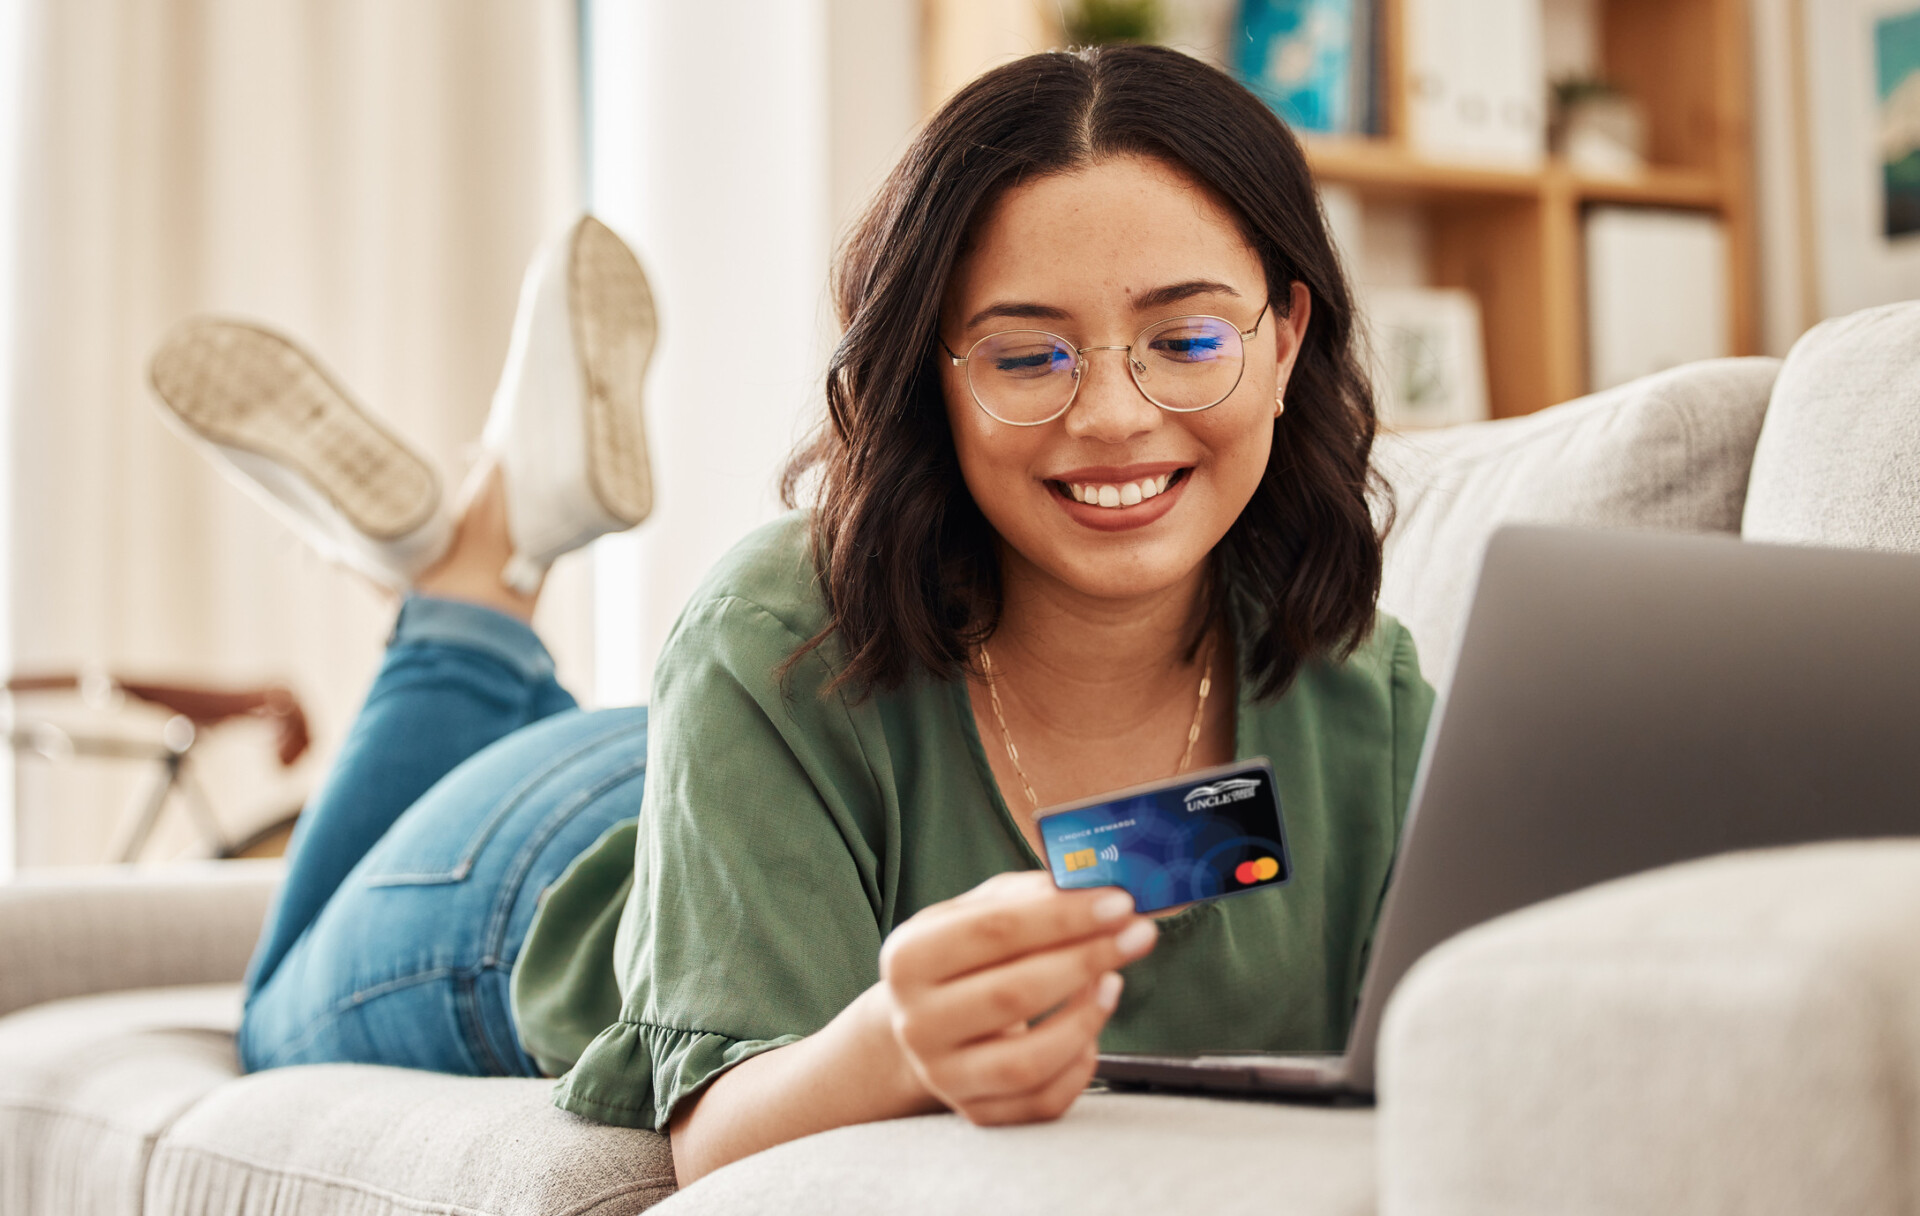 Woman lying on couch with laptop while happily looking at credit card.